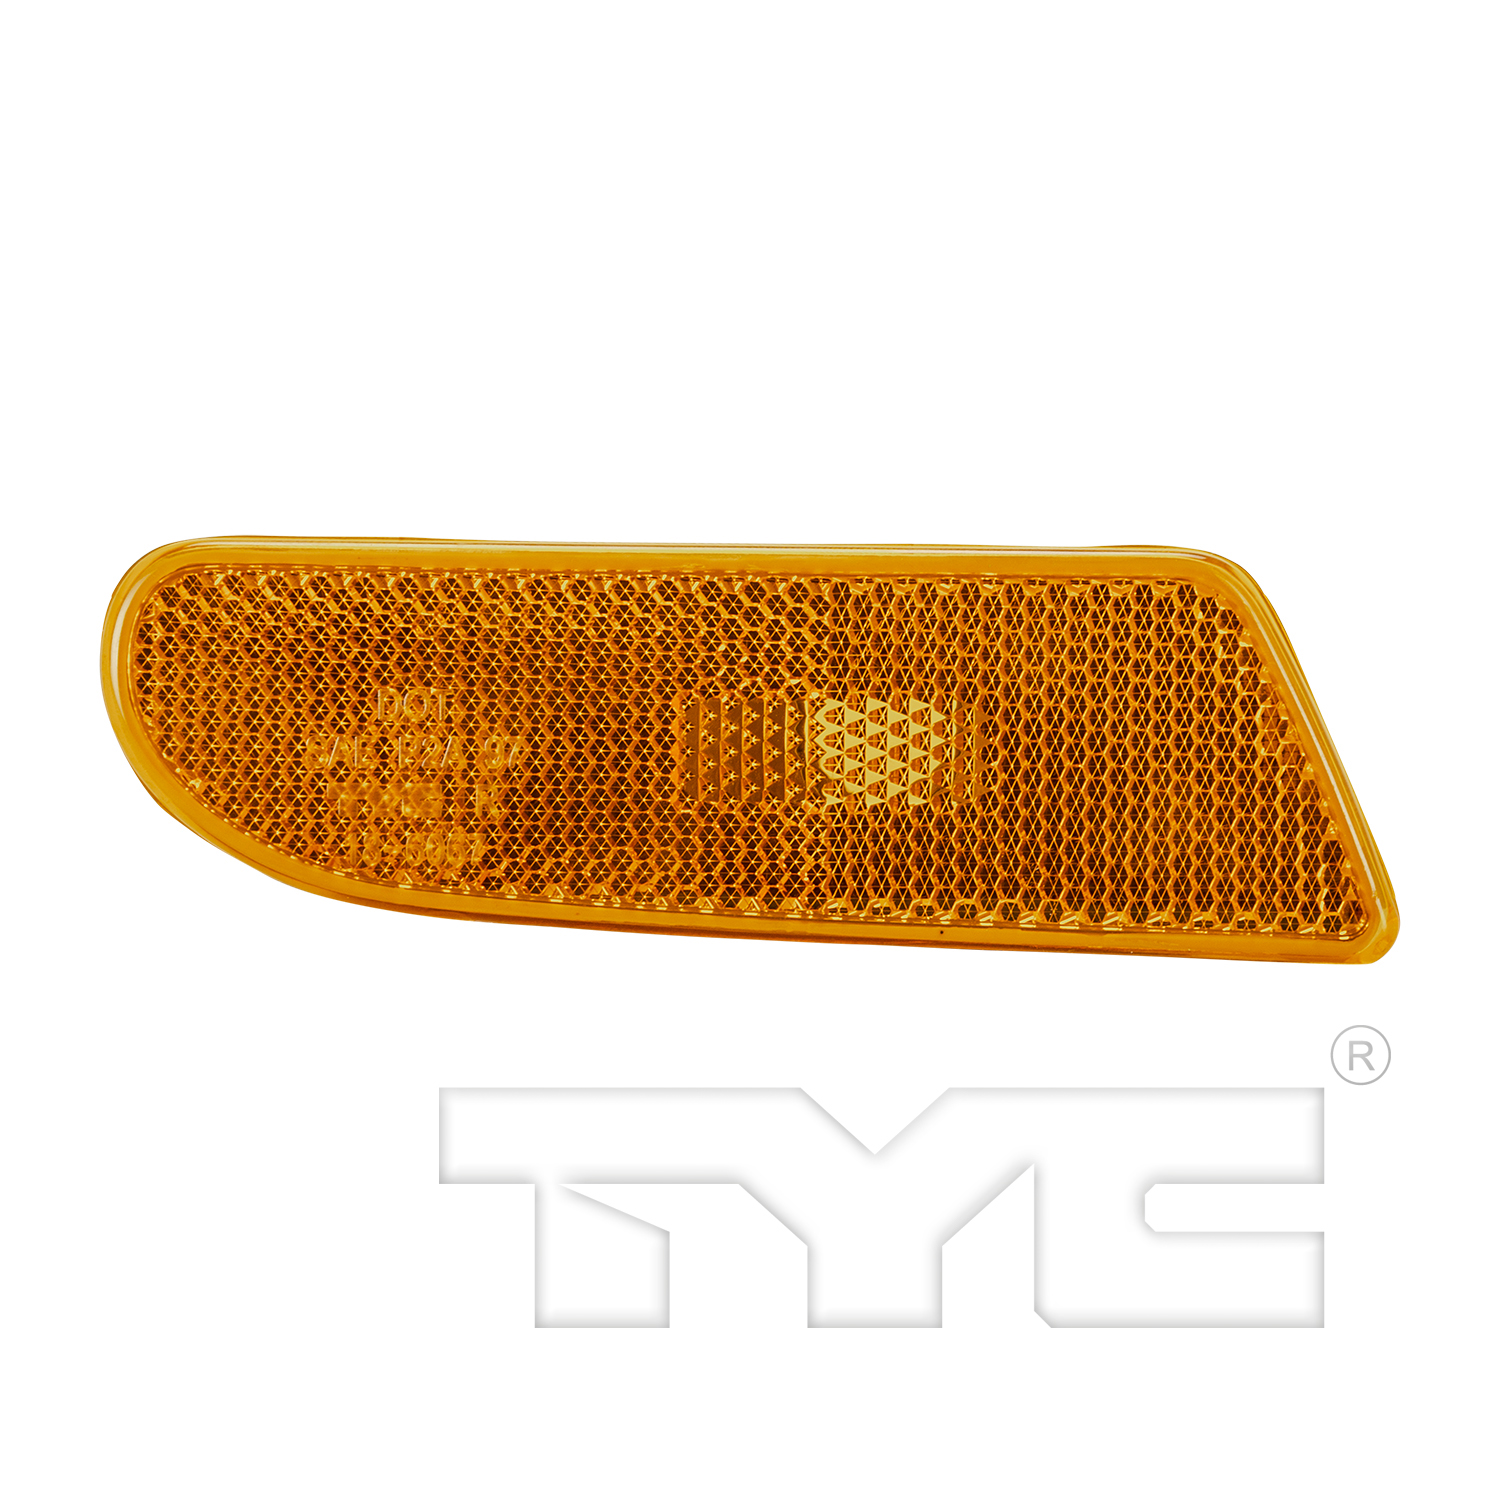 Aftermarket LAMPS for MERCEDES-BENZ - S55 AMG, S55 AMG,01-06,RT Front marker lamp lens